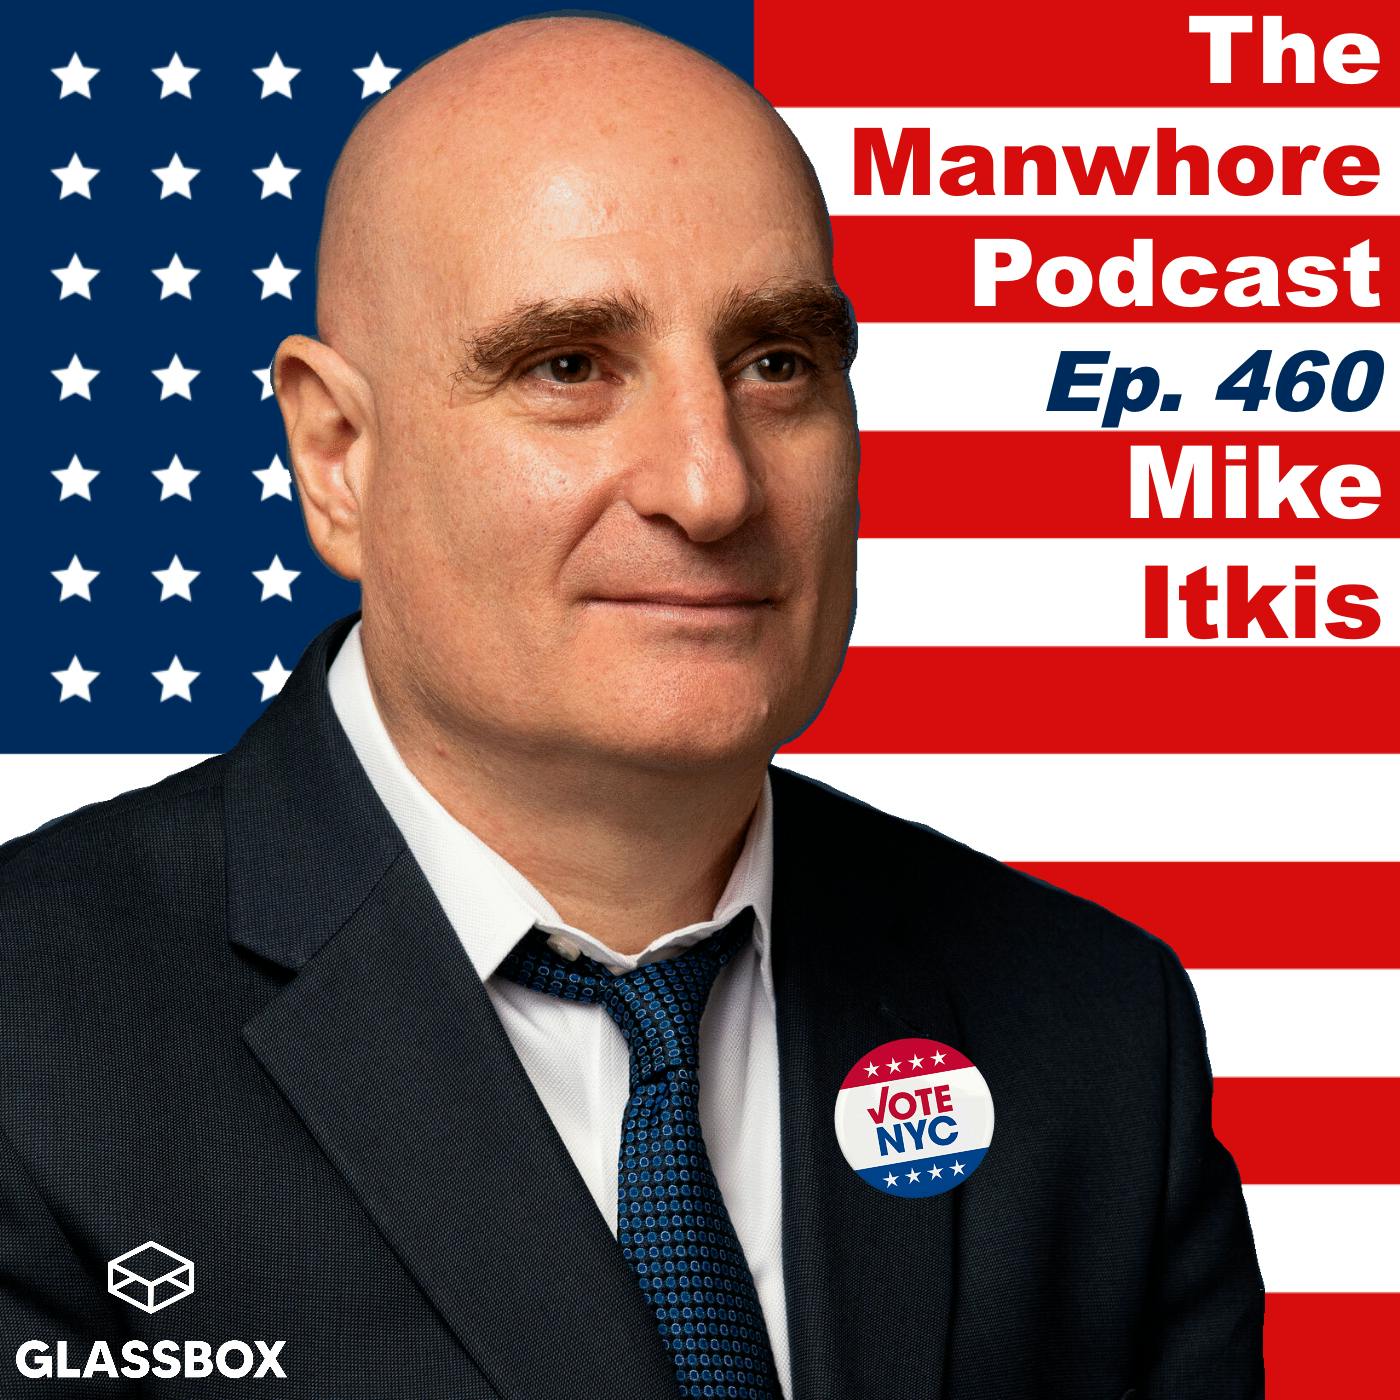 The Manwhore Podcast: A Sex-Positive Quest - Ep. 460: My Congressional Campaign Sex Tape with Mike Itkis (NY-12)